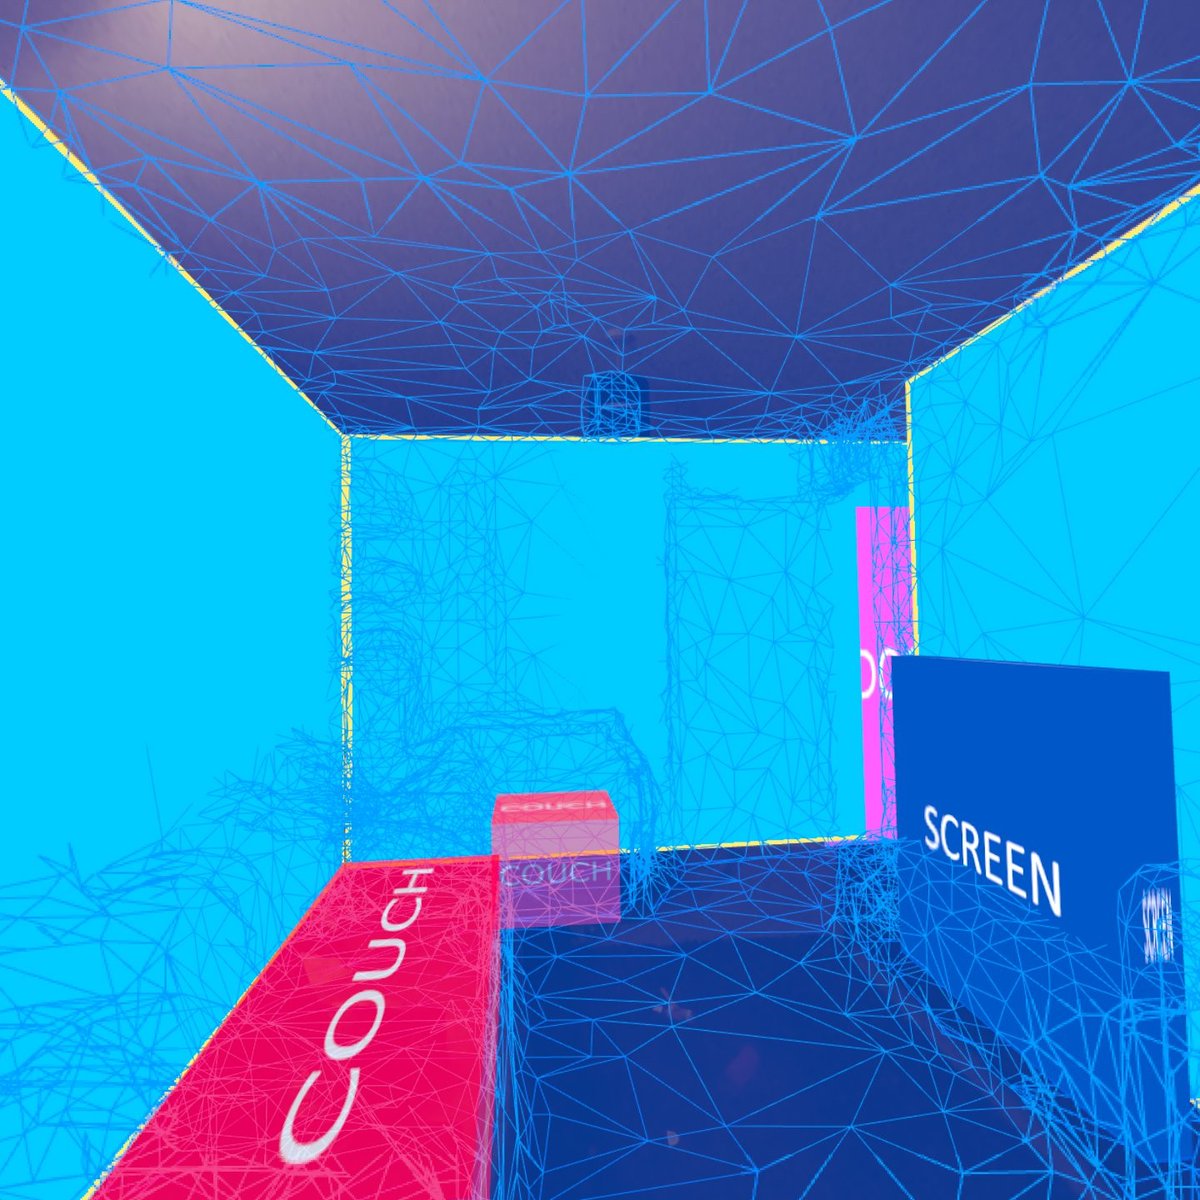 Got scene (Room) detection working in #UE5 #5.2 #Oculus Source for the #MetaQuest3 ,It took some trial and error but it's working great. Now to figure out spatial anchors. #VR #gamedev #gamedeveloper #VirtualReality #AR